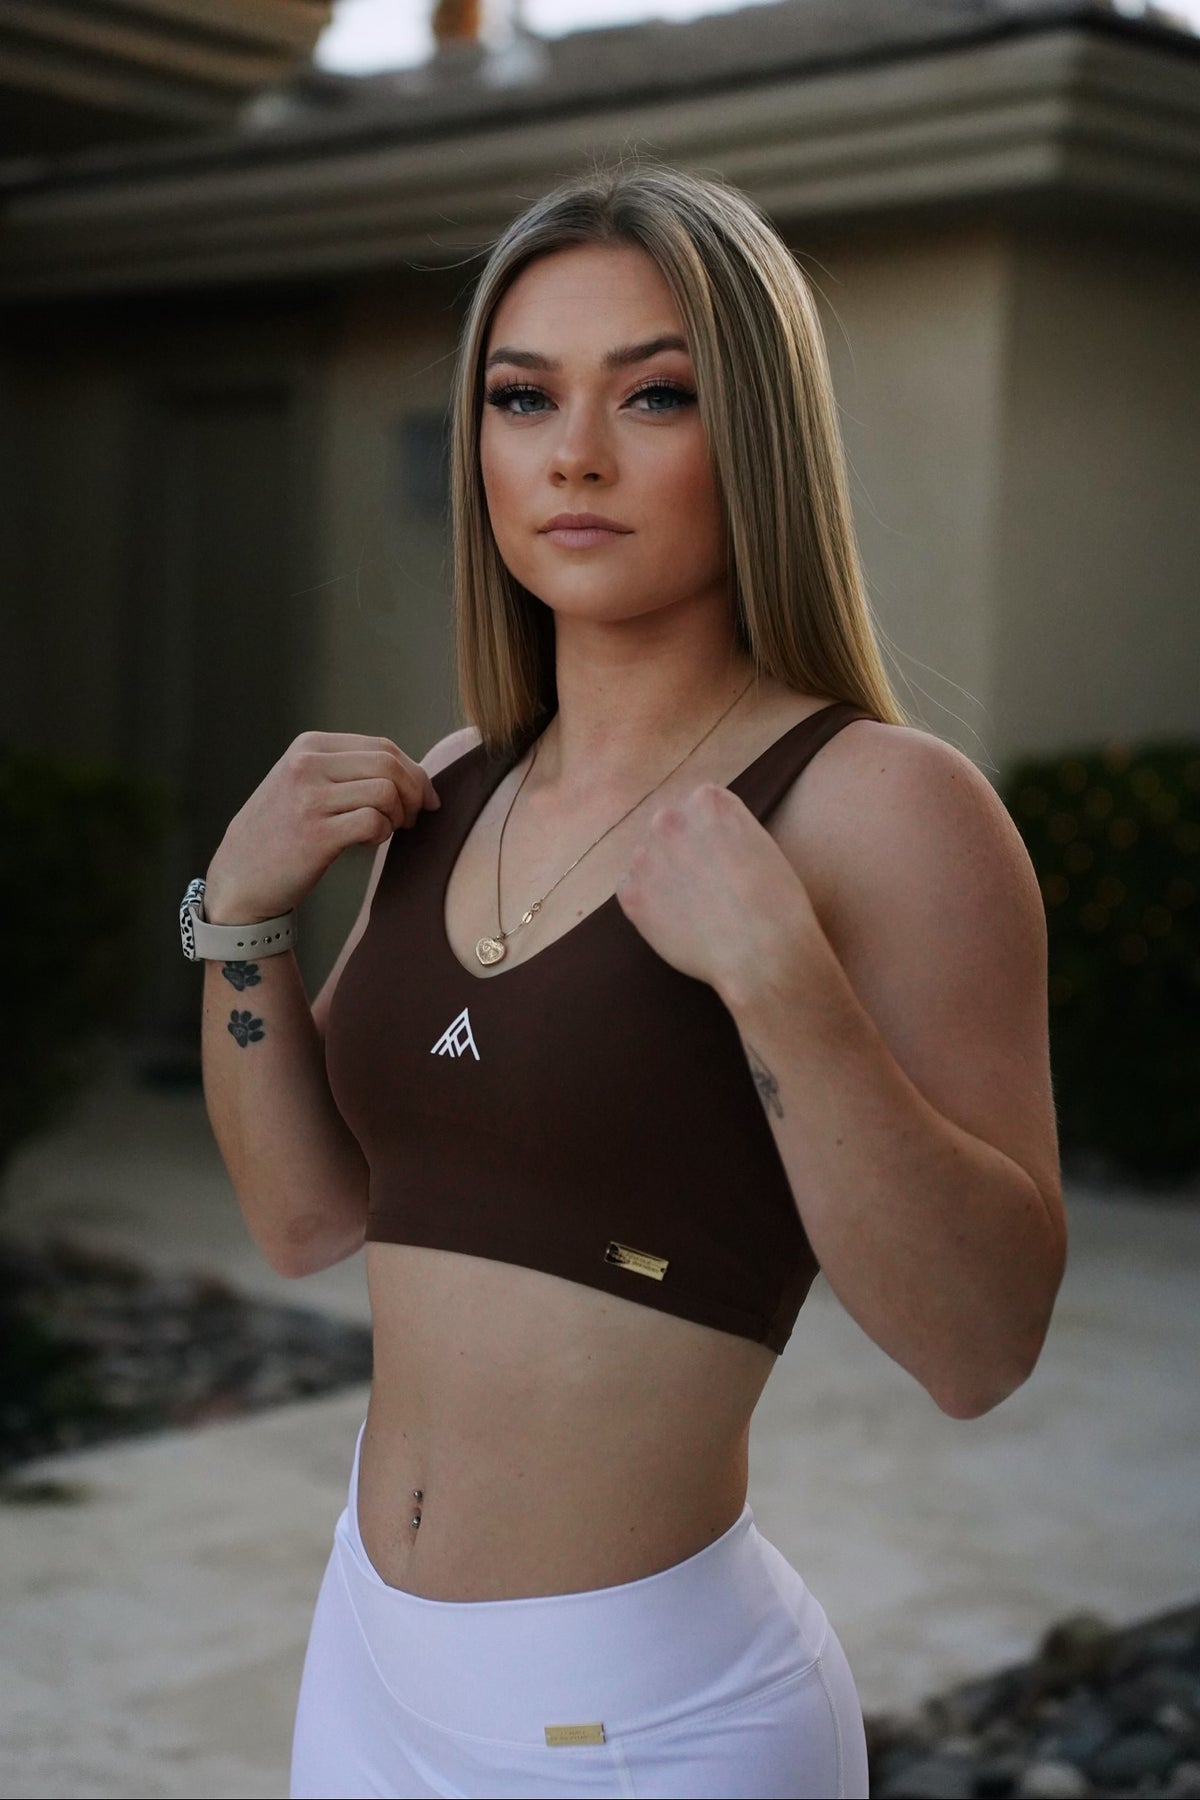 Fitted or Flare? Cam is wearing the Foxy Sports Bra and Foxy Flare